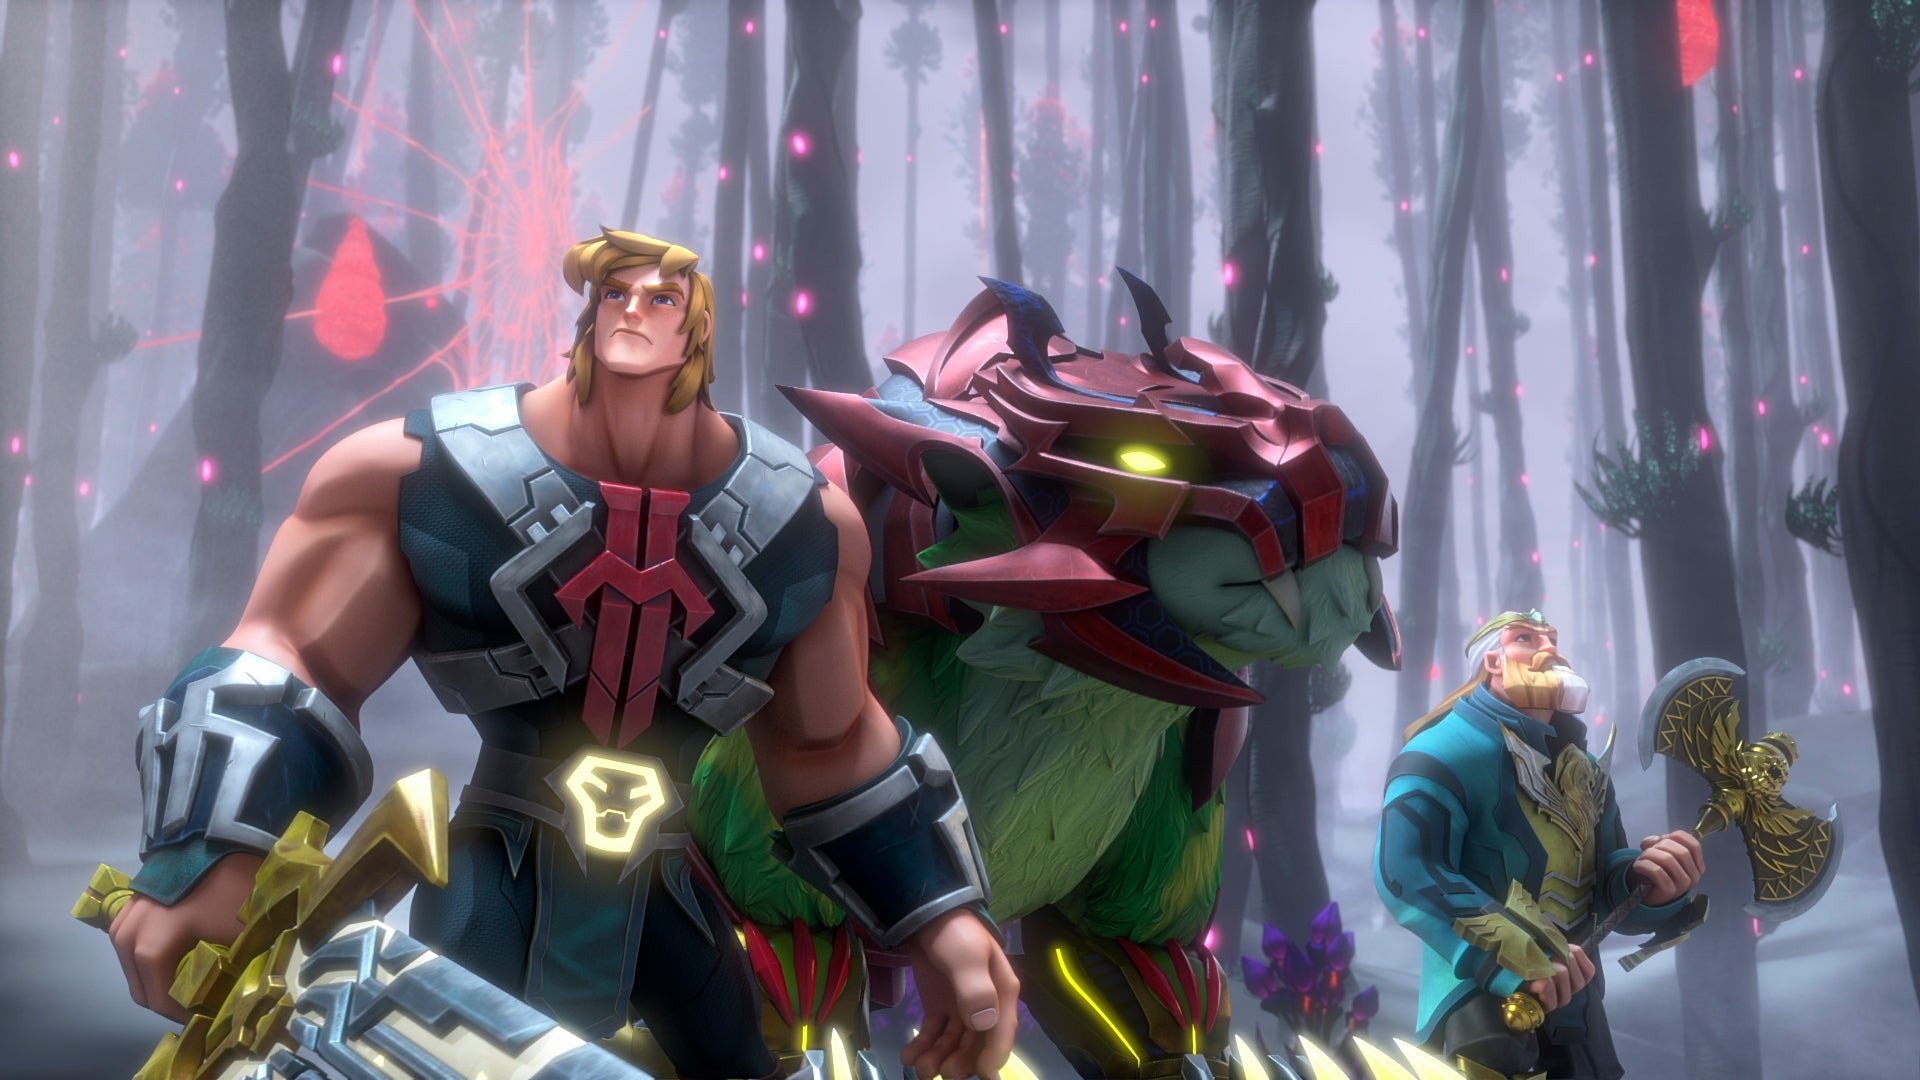  He-Man and the Masters of the Universe season 3, Official Trailer